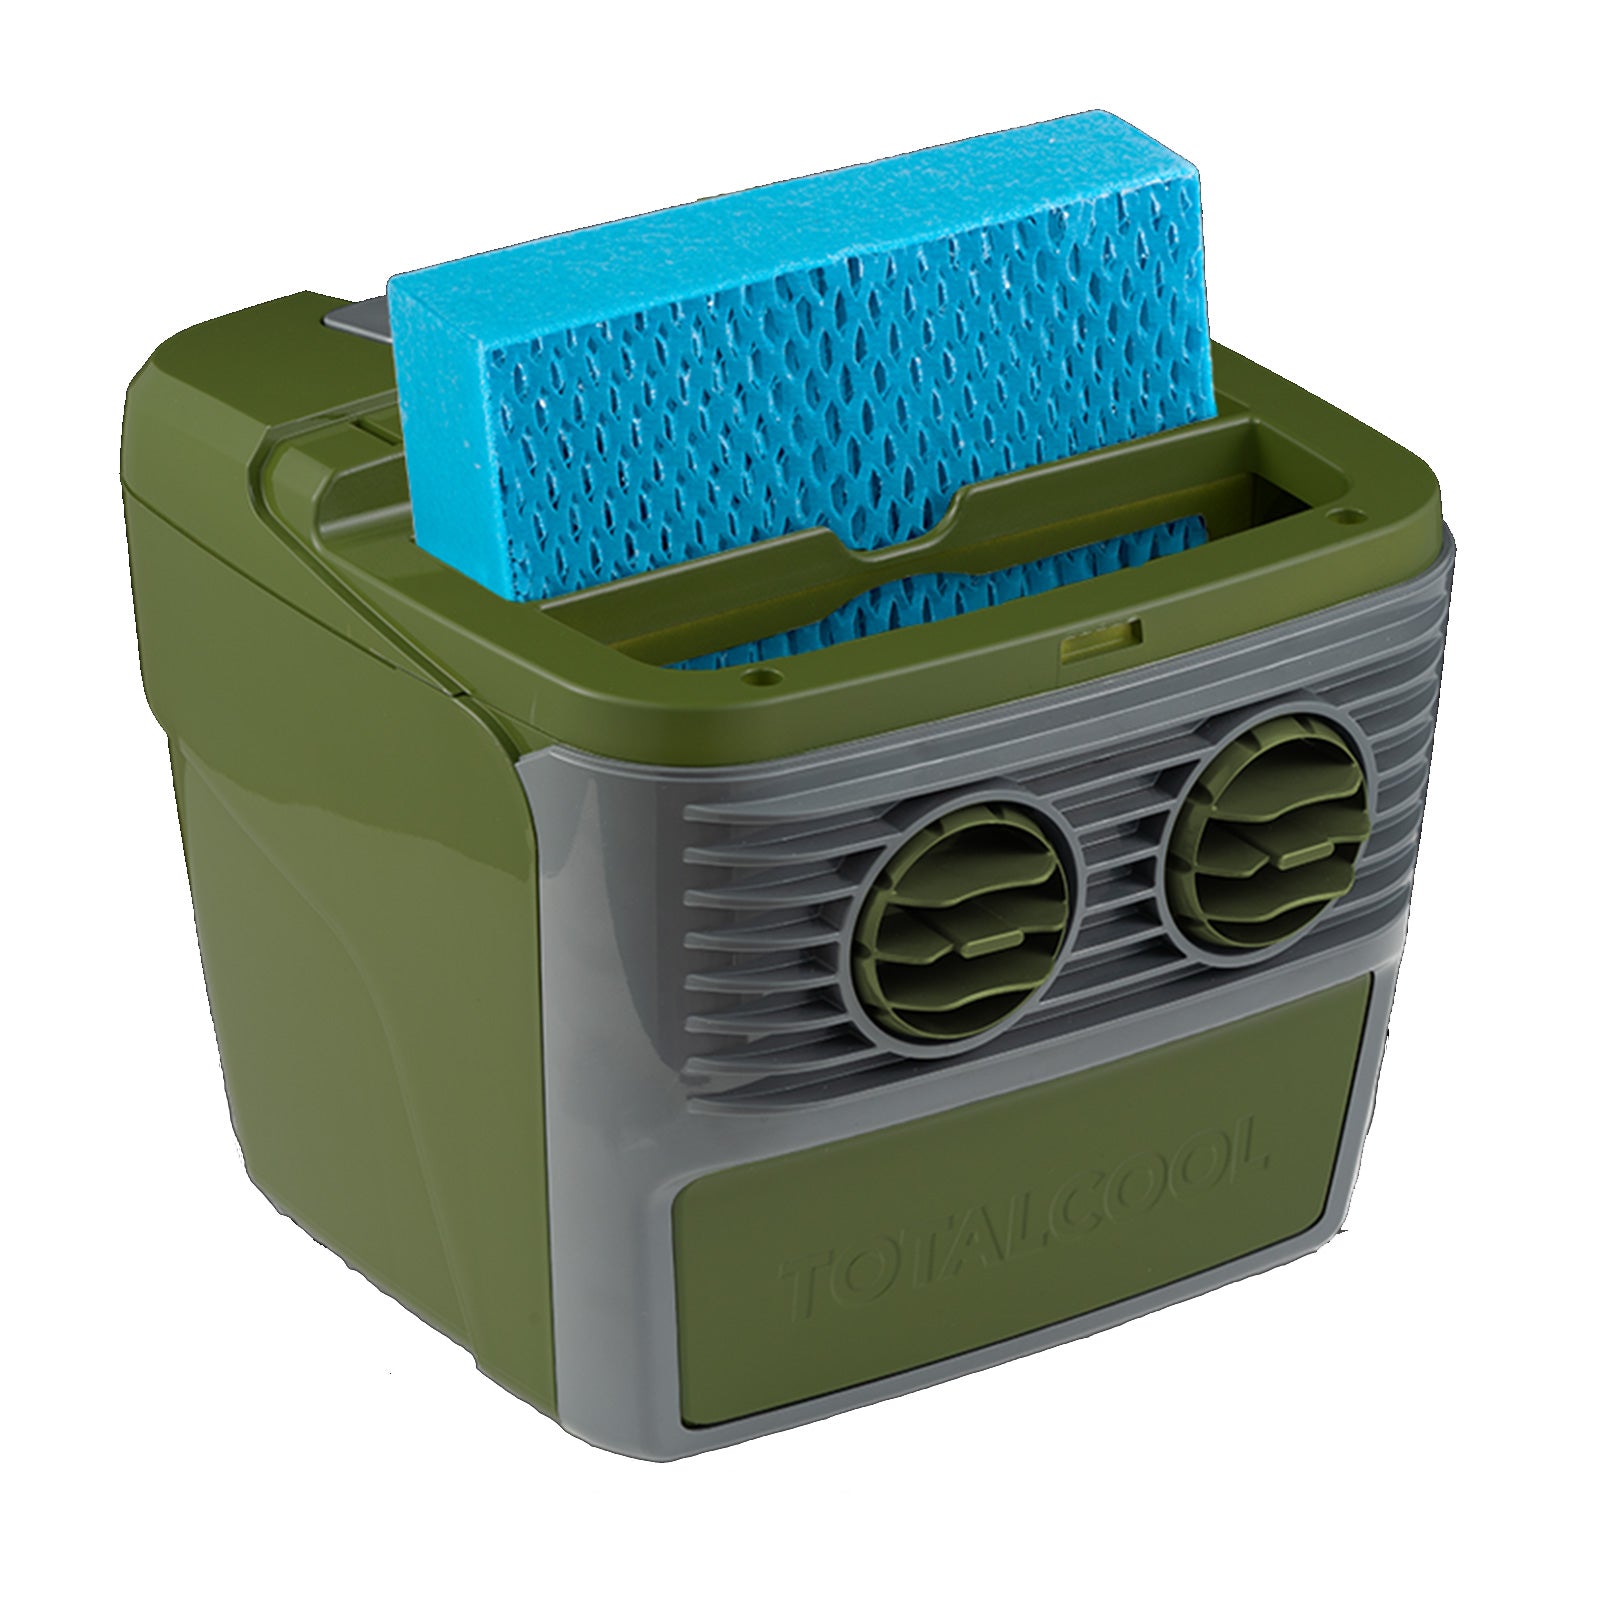 Totalcool Total Cool 3000 Portable Evaporative Cooling System